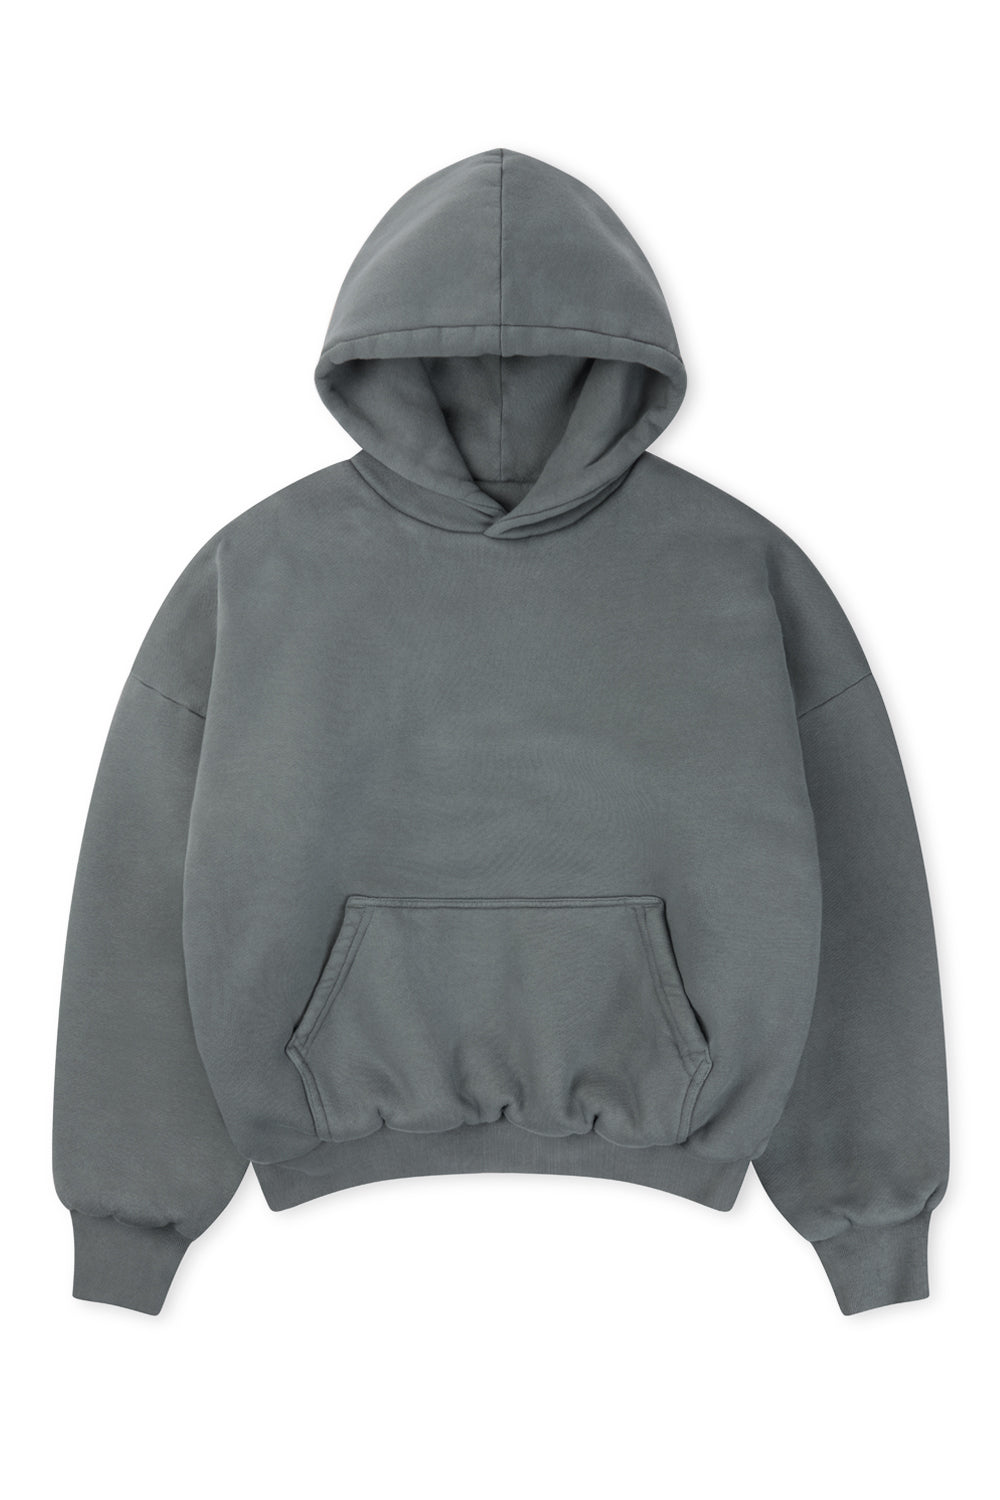 1000 GSM 'Mystery Box' Double Hoodie